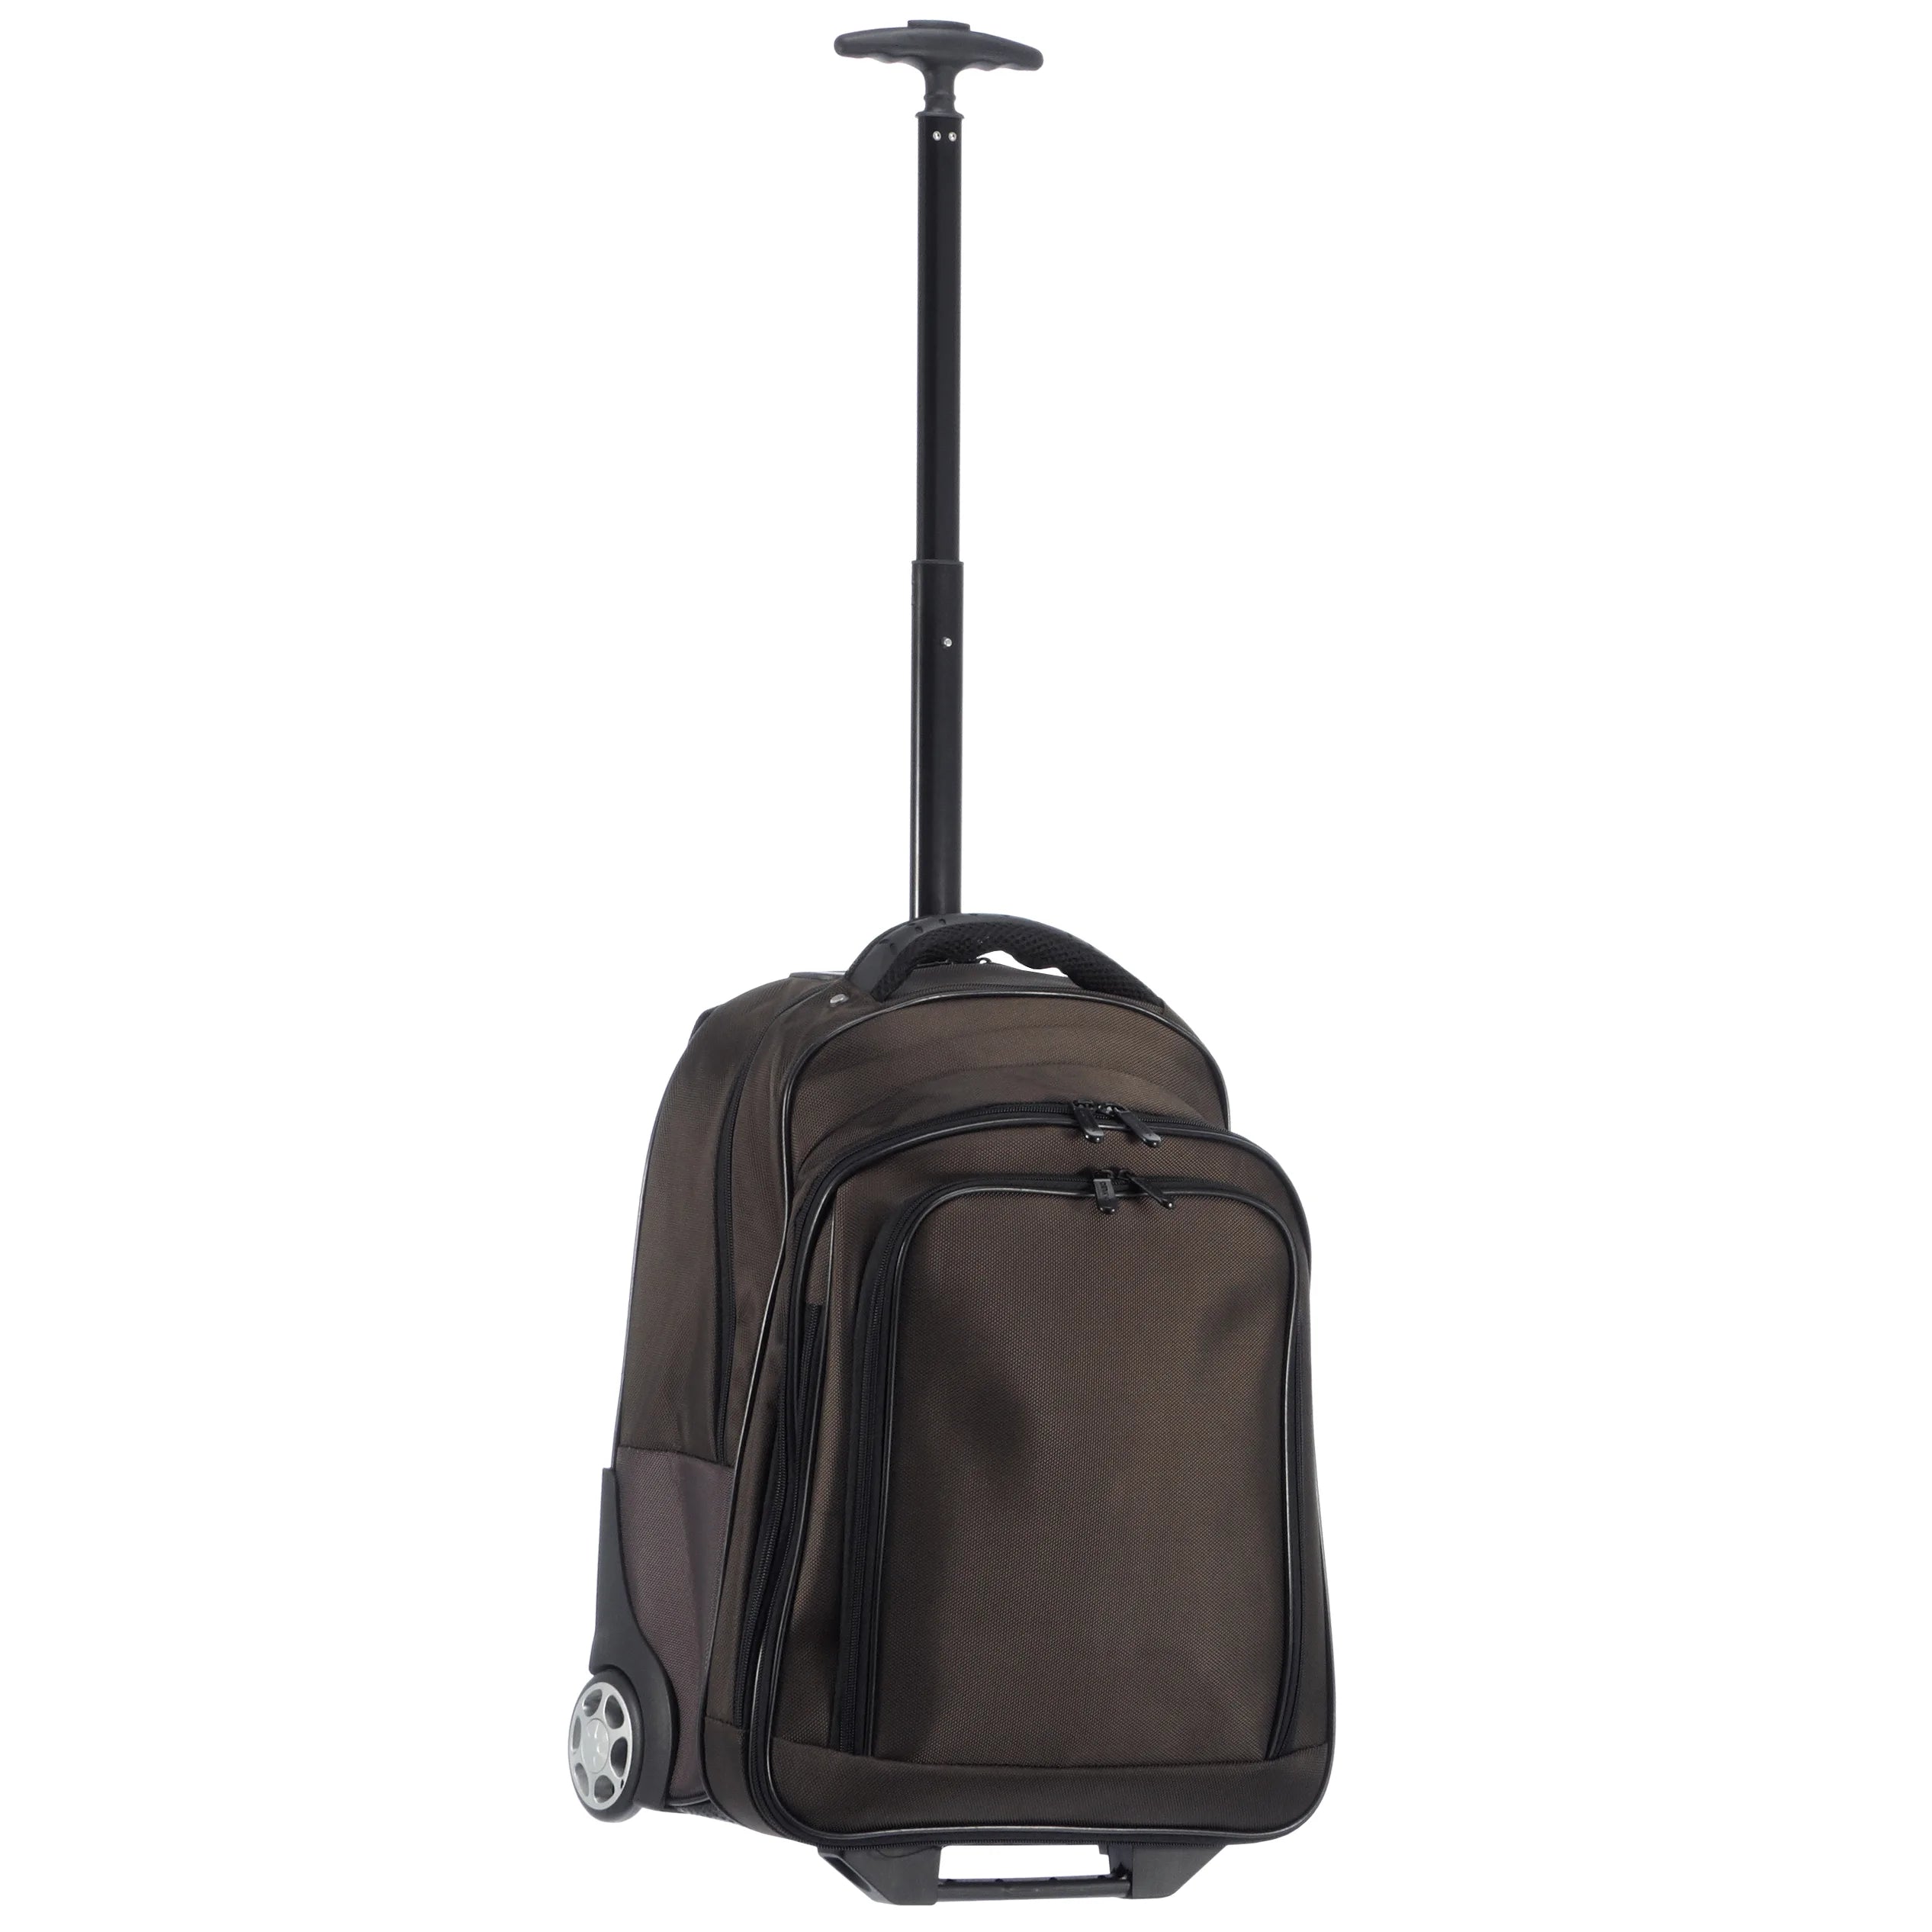 Dermata Business Mobile Office with backpack function 44 cm Edition 2015 - brown